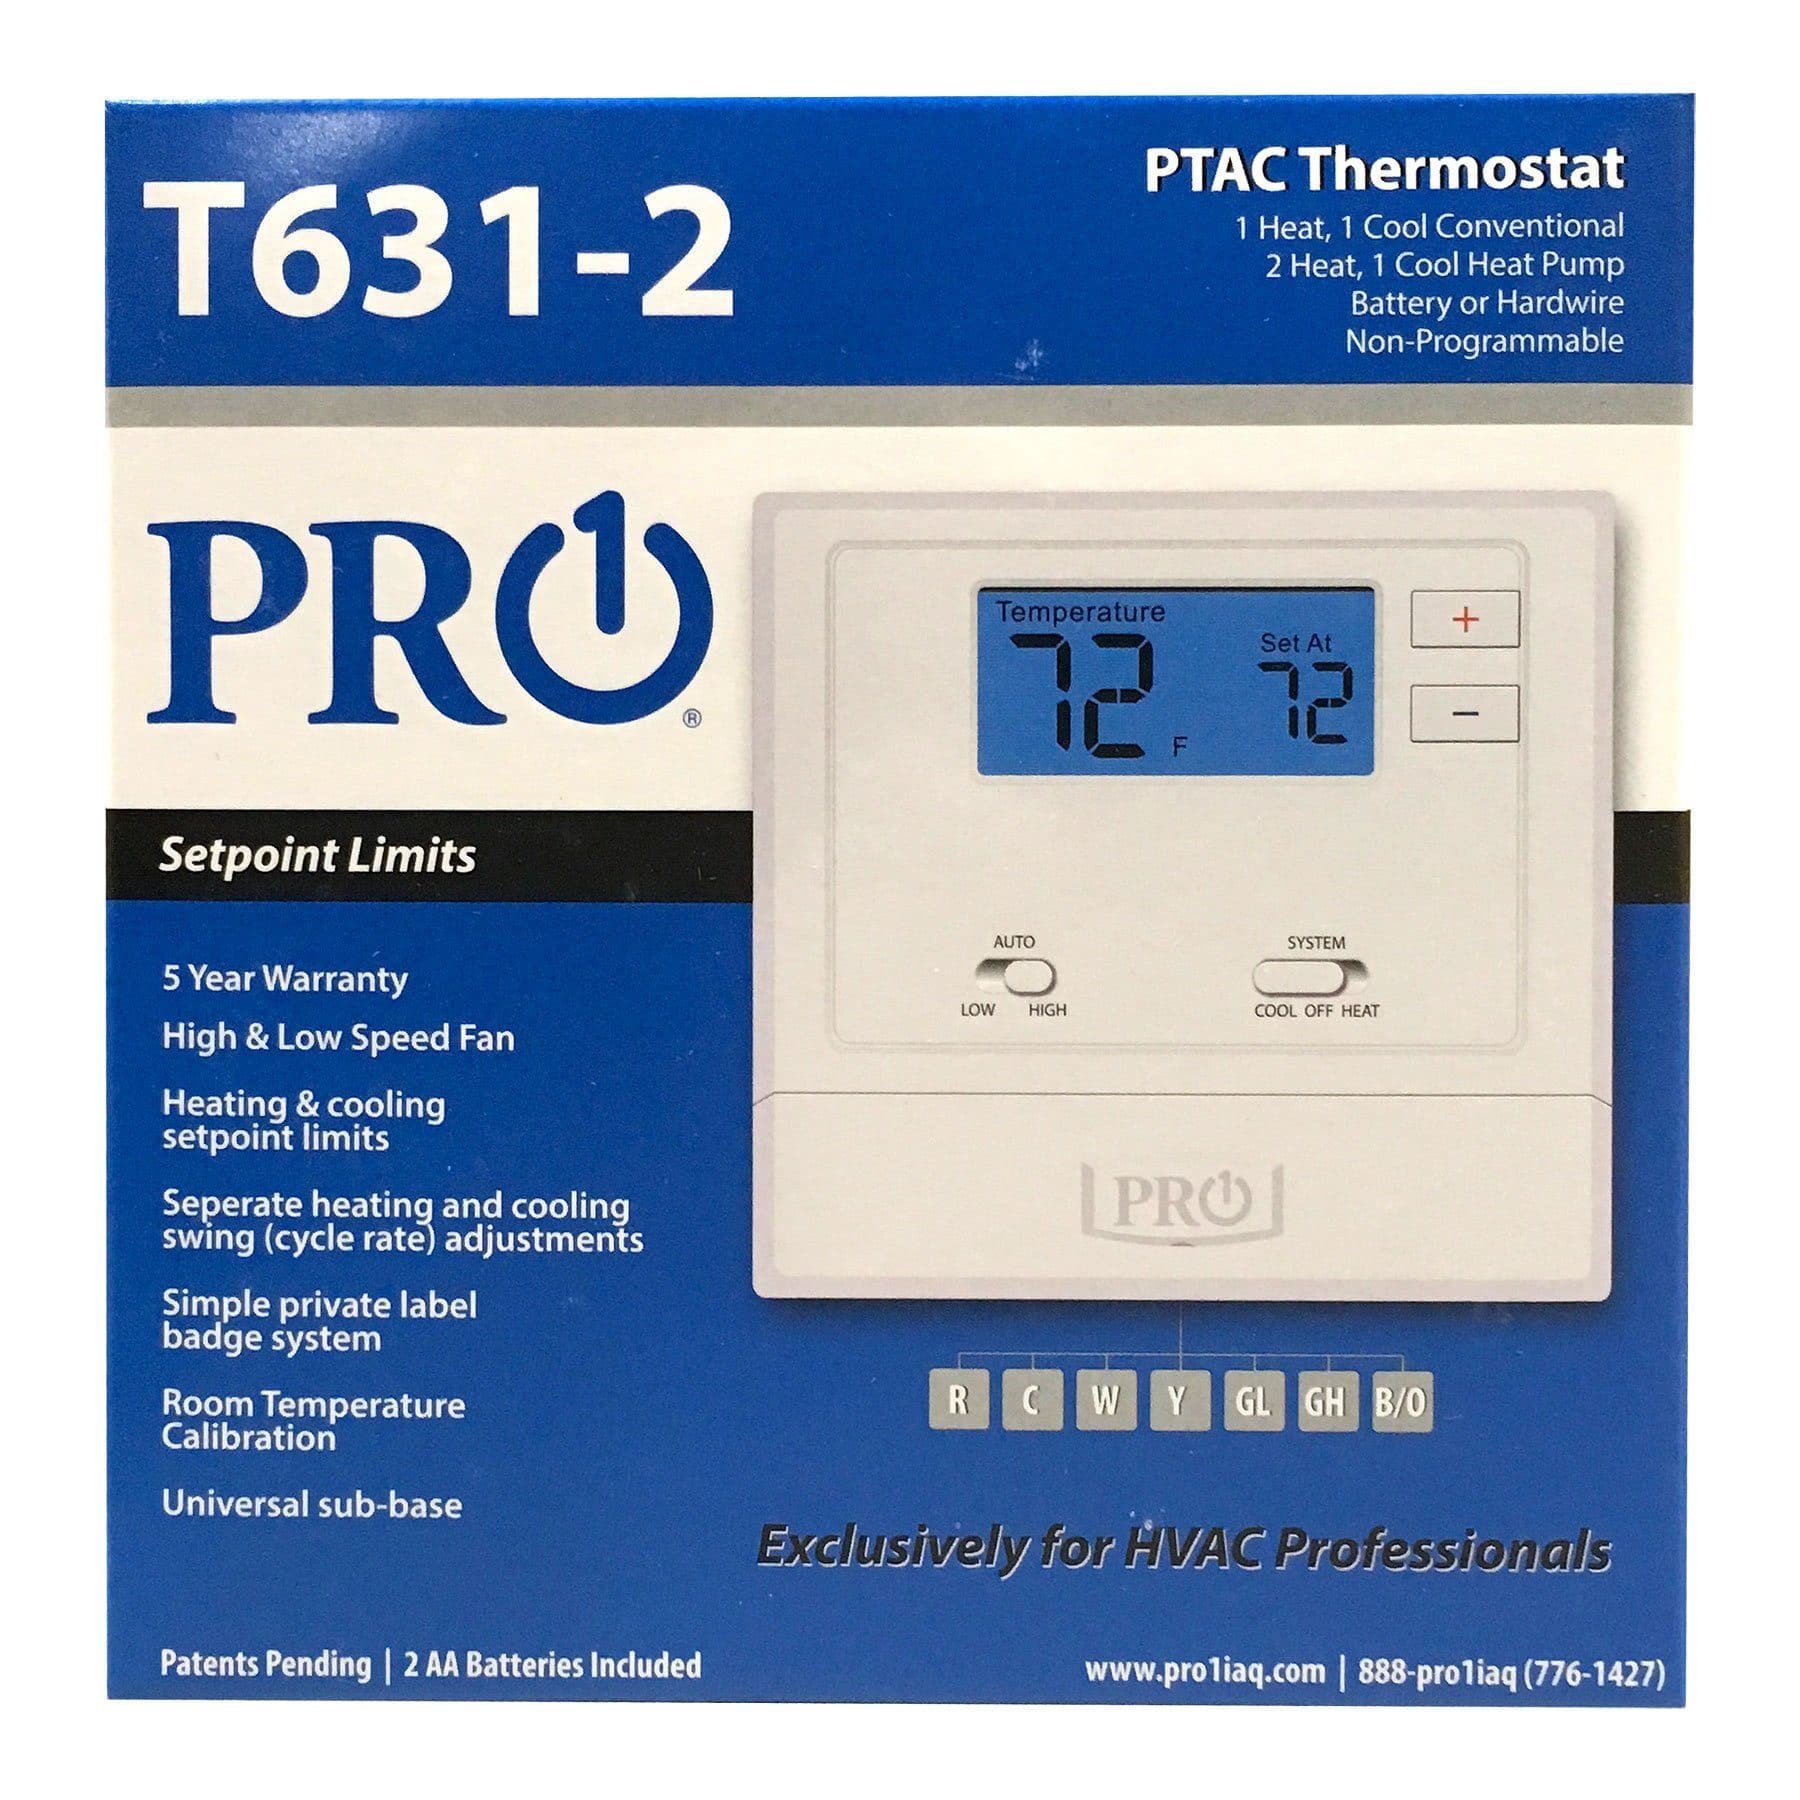 Pro1 T701 Non-Programmable Thermostat - 1H/1C